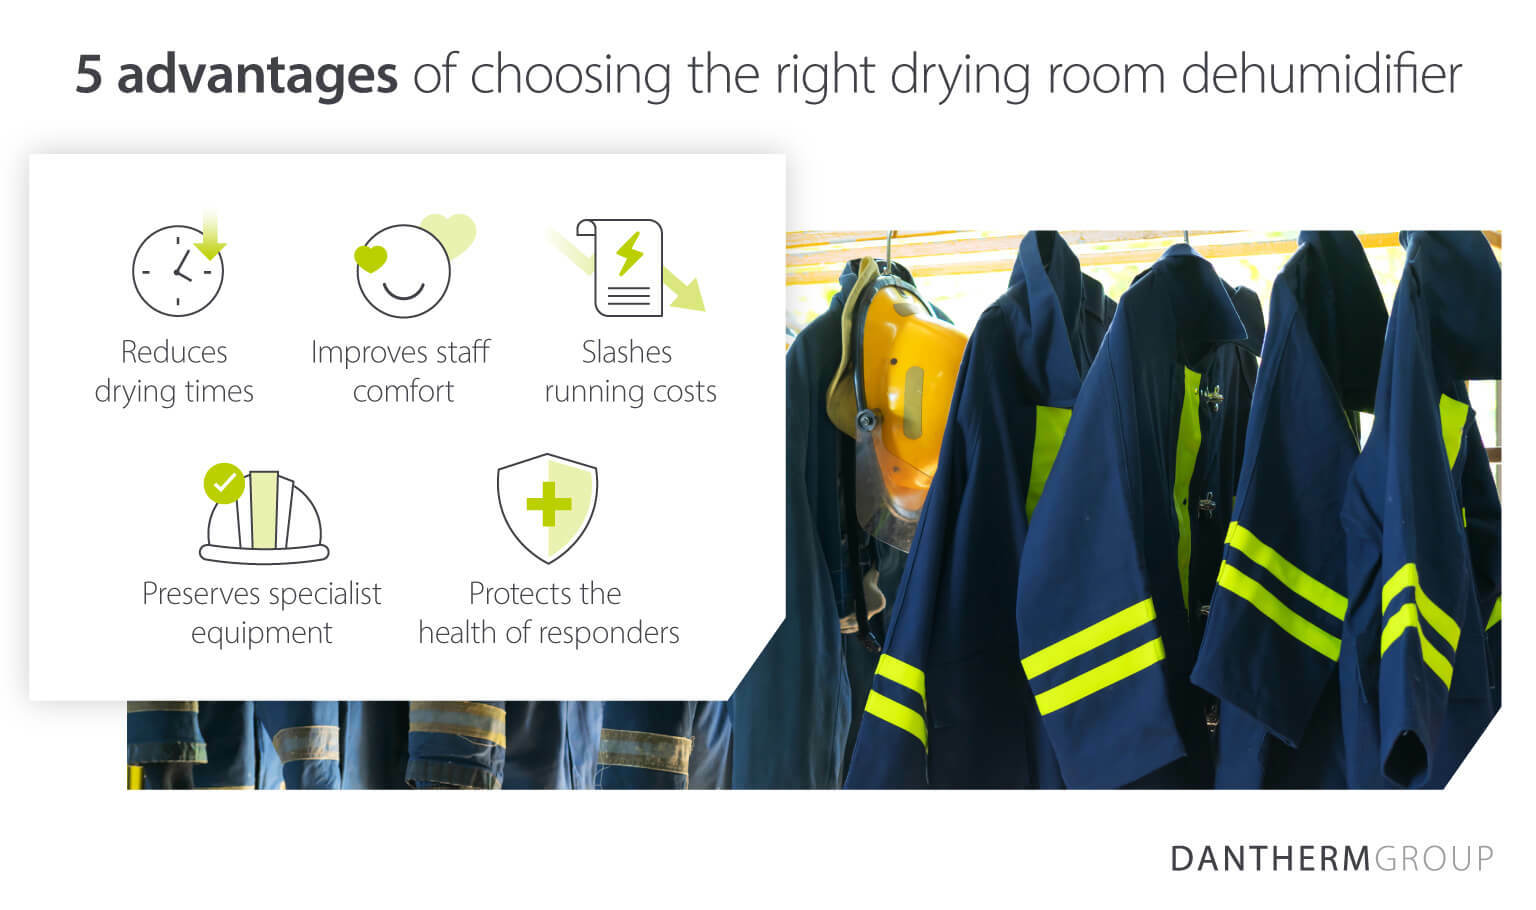 5 advantages of choosing the right drying room dehumidifier